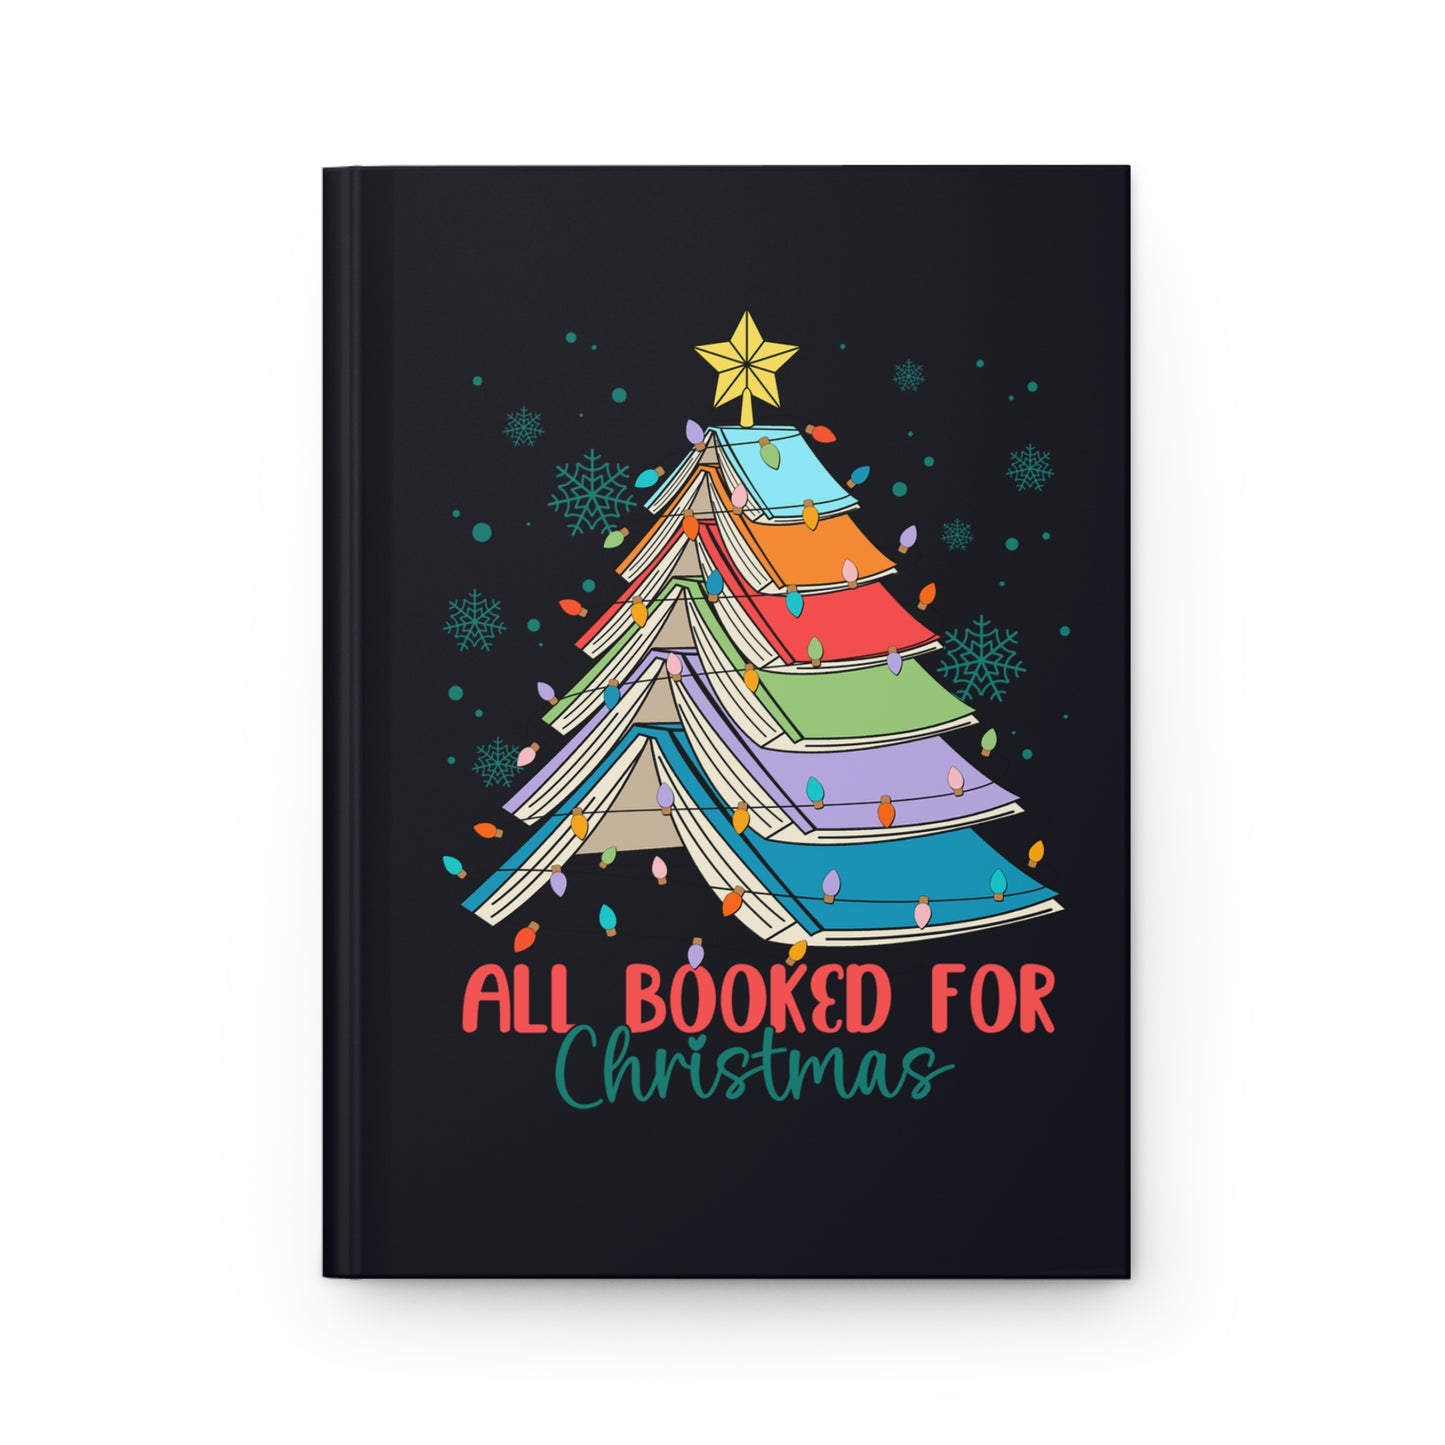 All Booked Up - Hardcover Journal Matte